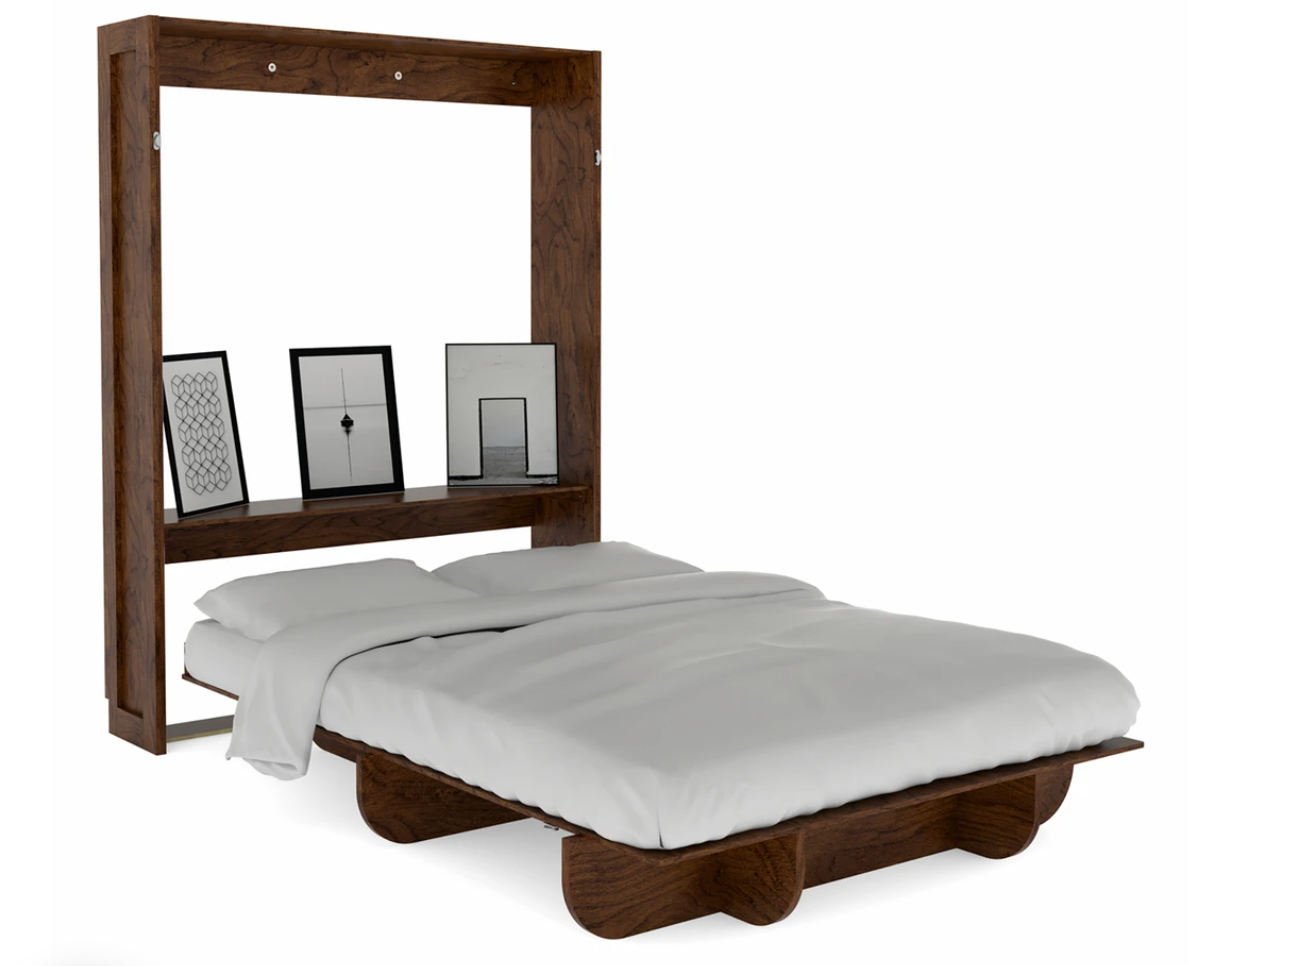 Where to Buy a Murphy Bed Kit